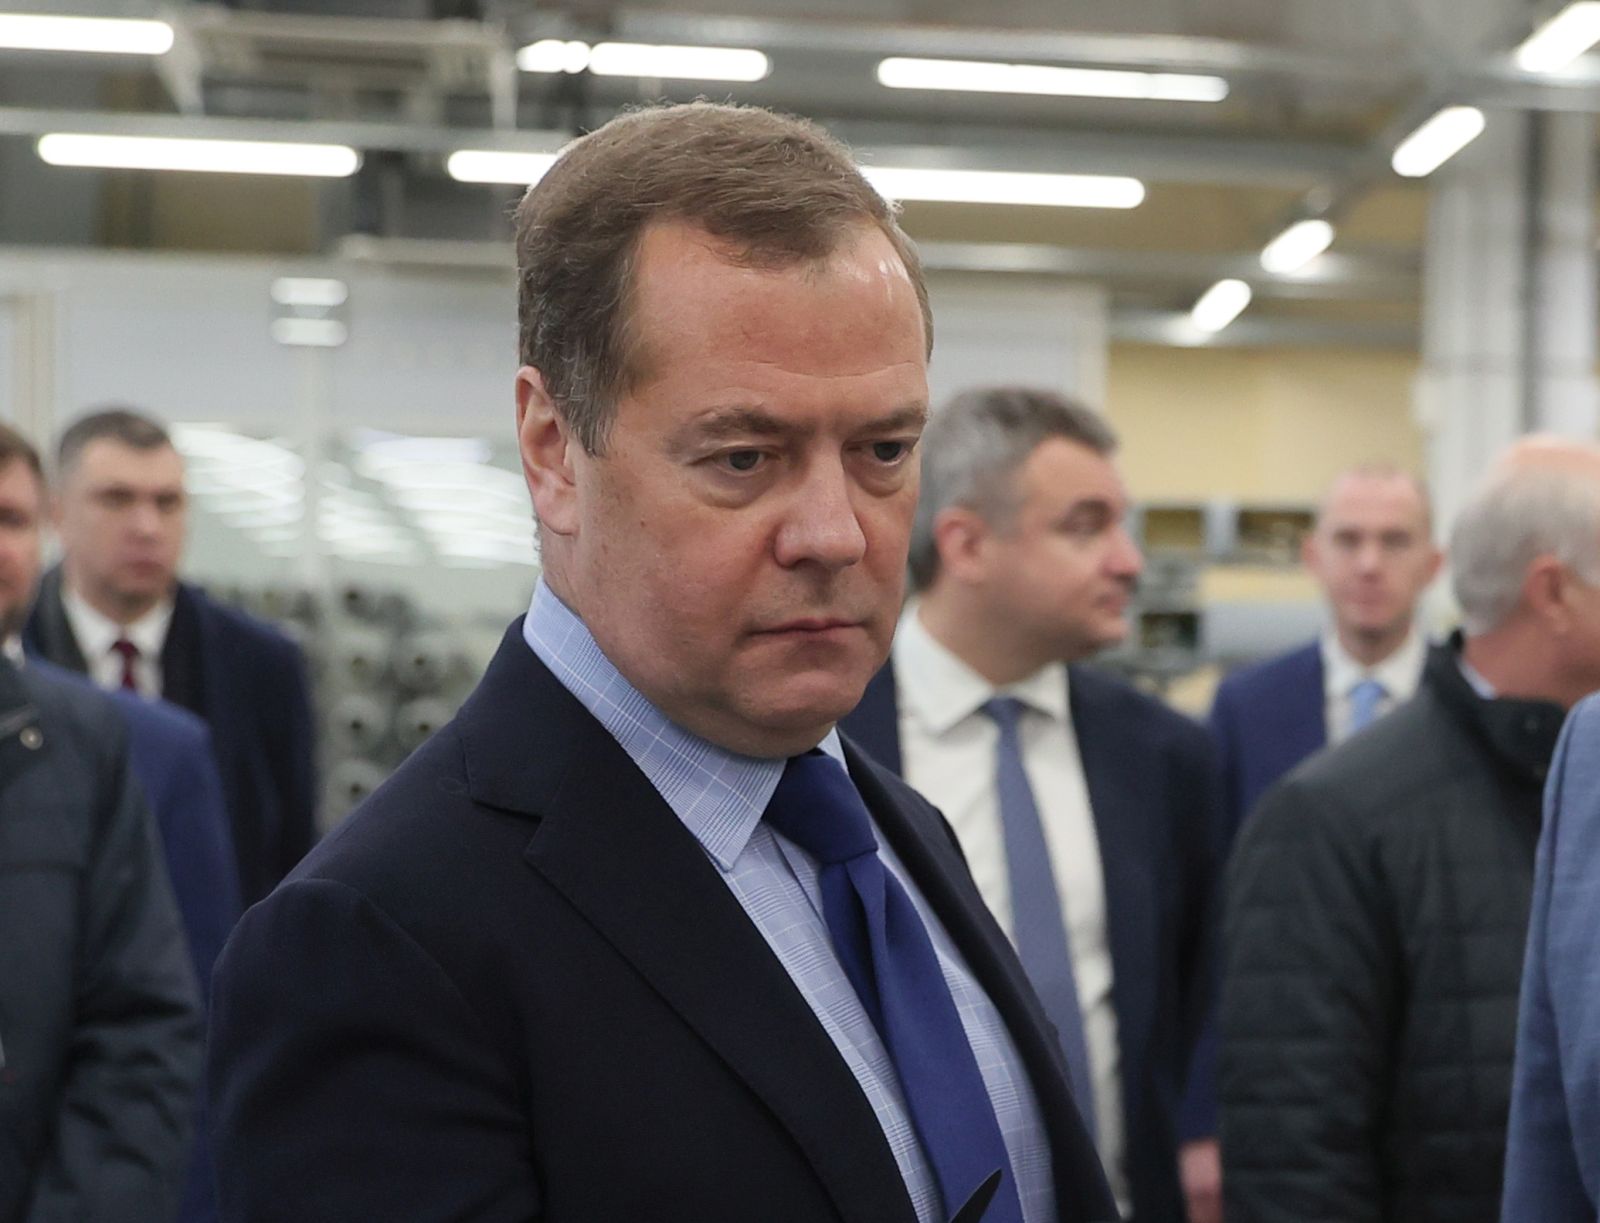 epa10243635 Deputy chairman of the Russian Security Council Dmitry Medvedev (L), accompanied by Head of production of unmanned aerial vehicles Nikita Morshchakin (R), visits the Special Technology Center in St. Petersburg, Russia, 14 October 2022.  EPA/EKATERINA SHTUKINA / SPUTNIK POOL MANDATORY CREDIT